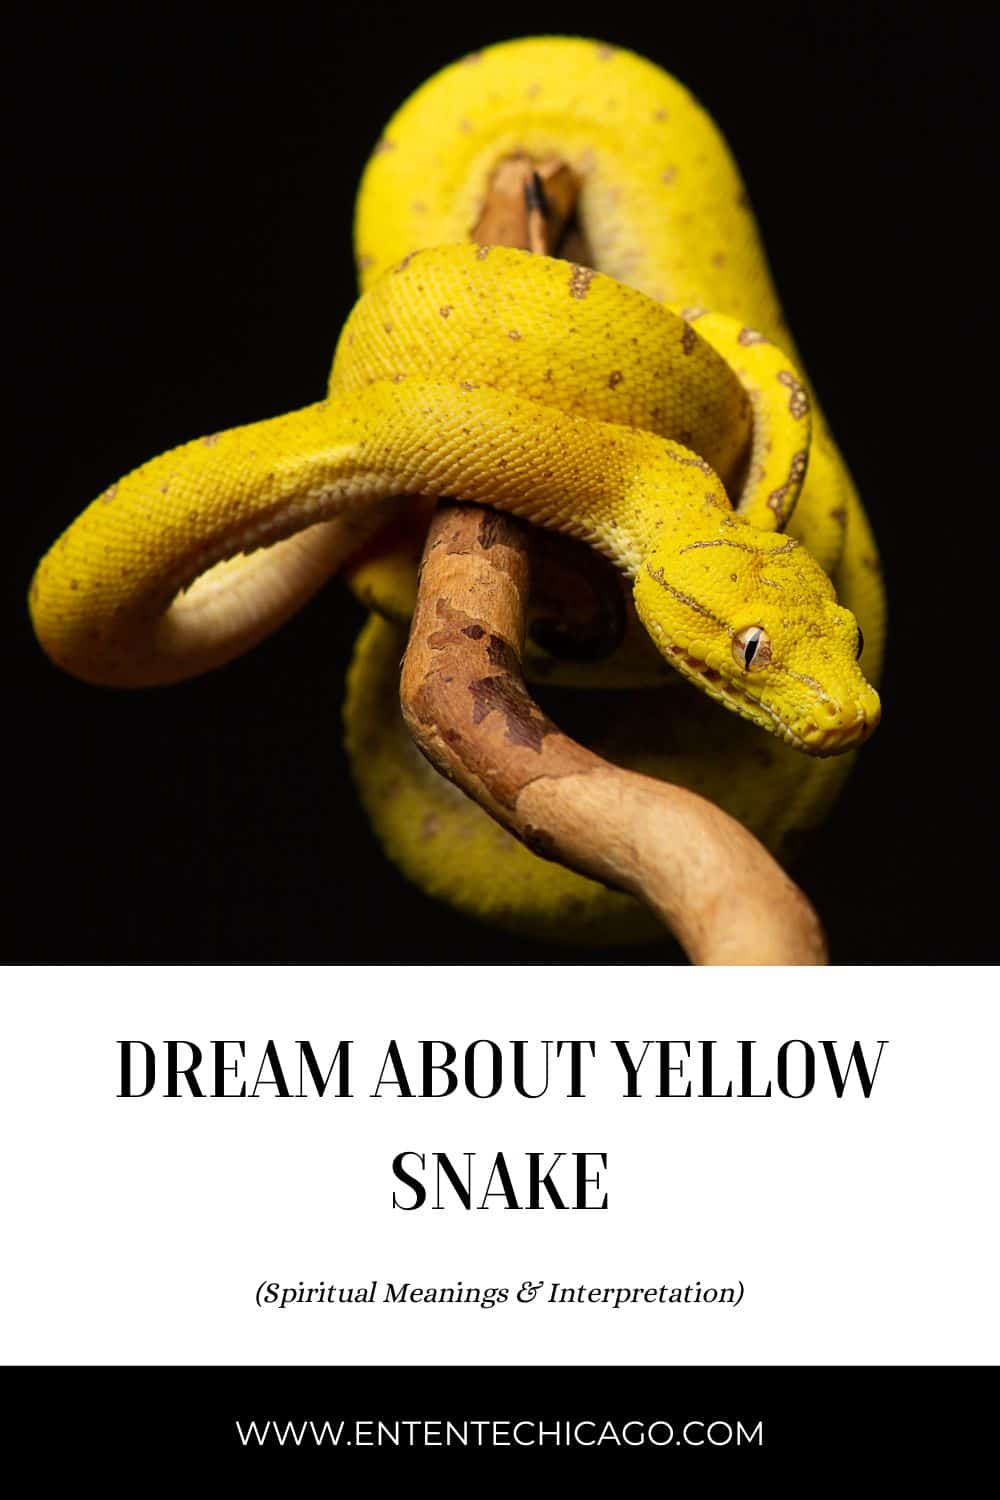 Spiritual Meaning of Snakes in Our Dreams